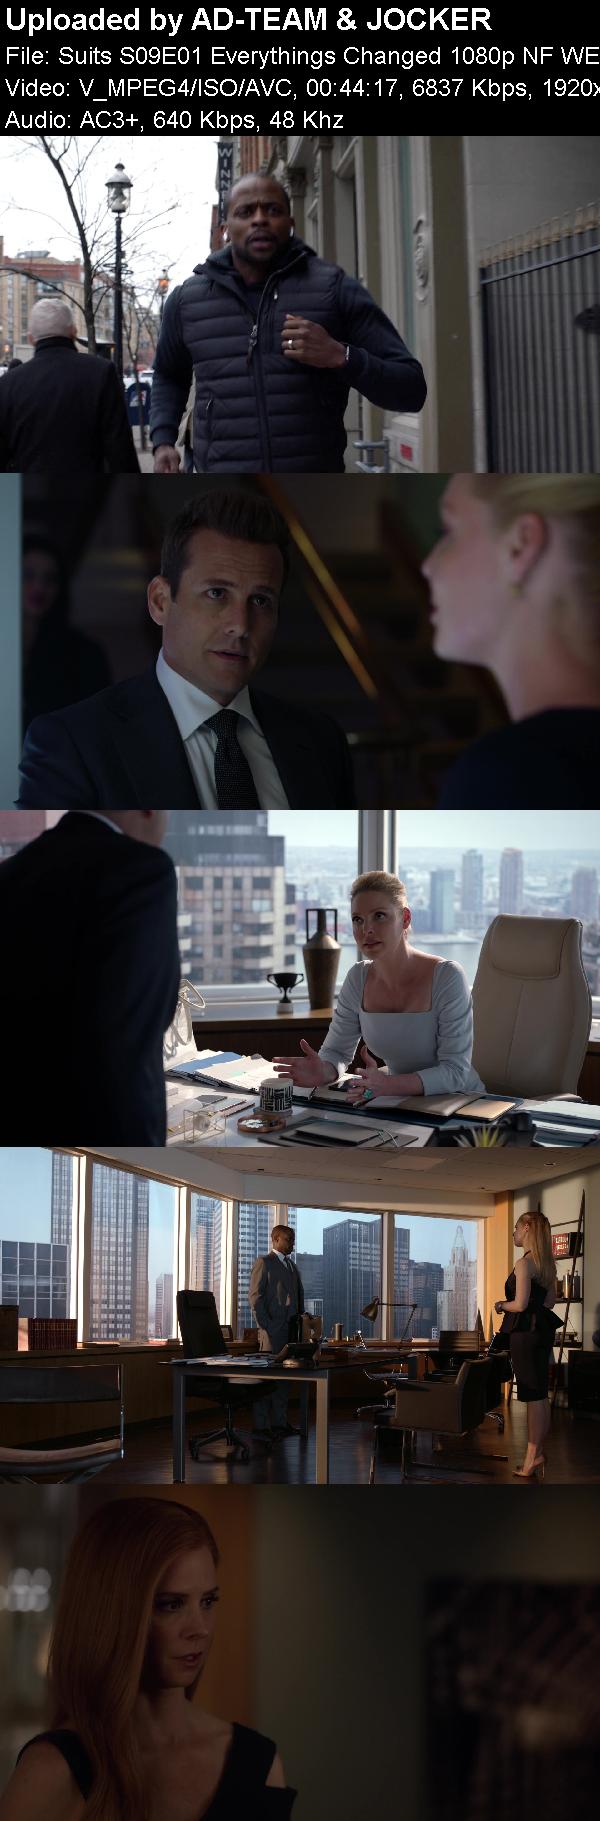 Suits S09e01 Everythings Changed 1080p Nf Web-dl Dd+5 1 X264-ajp69